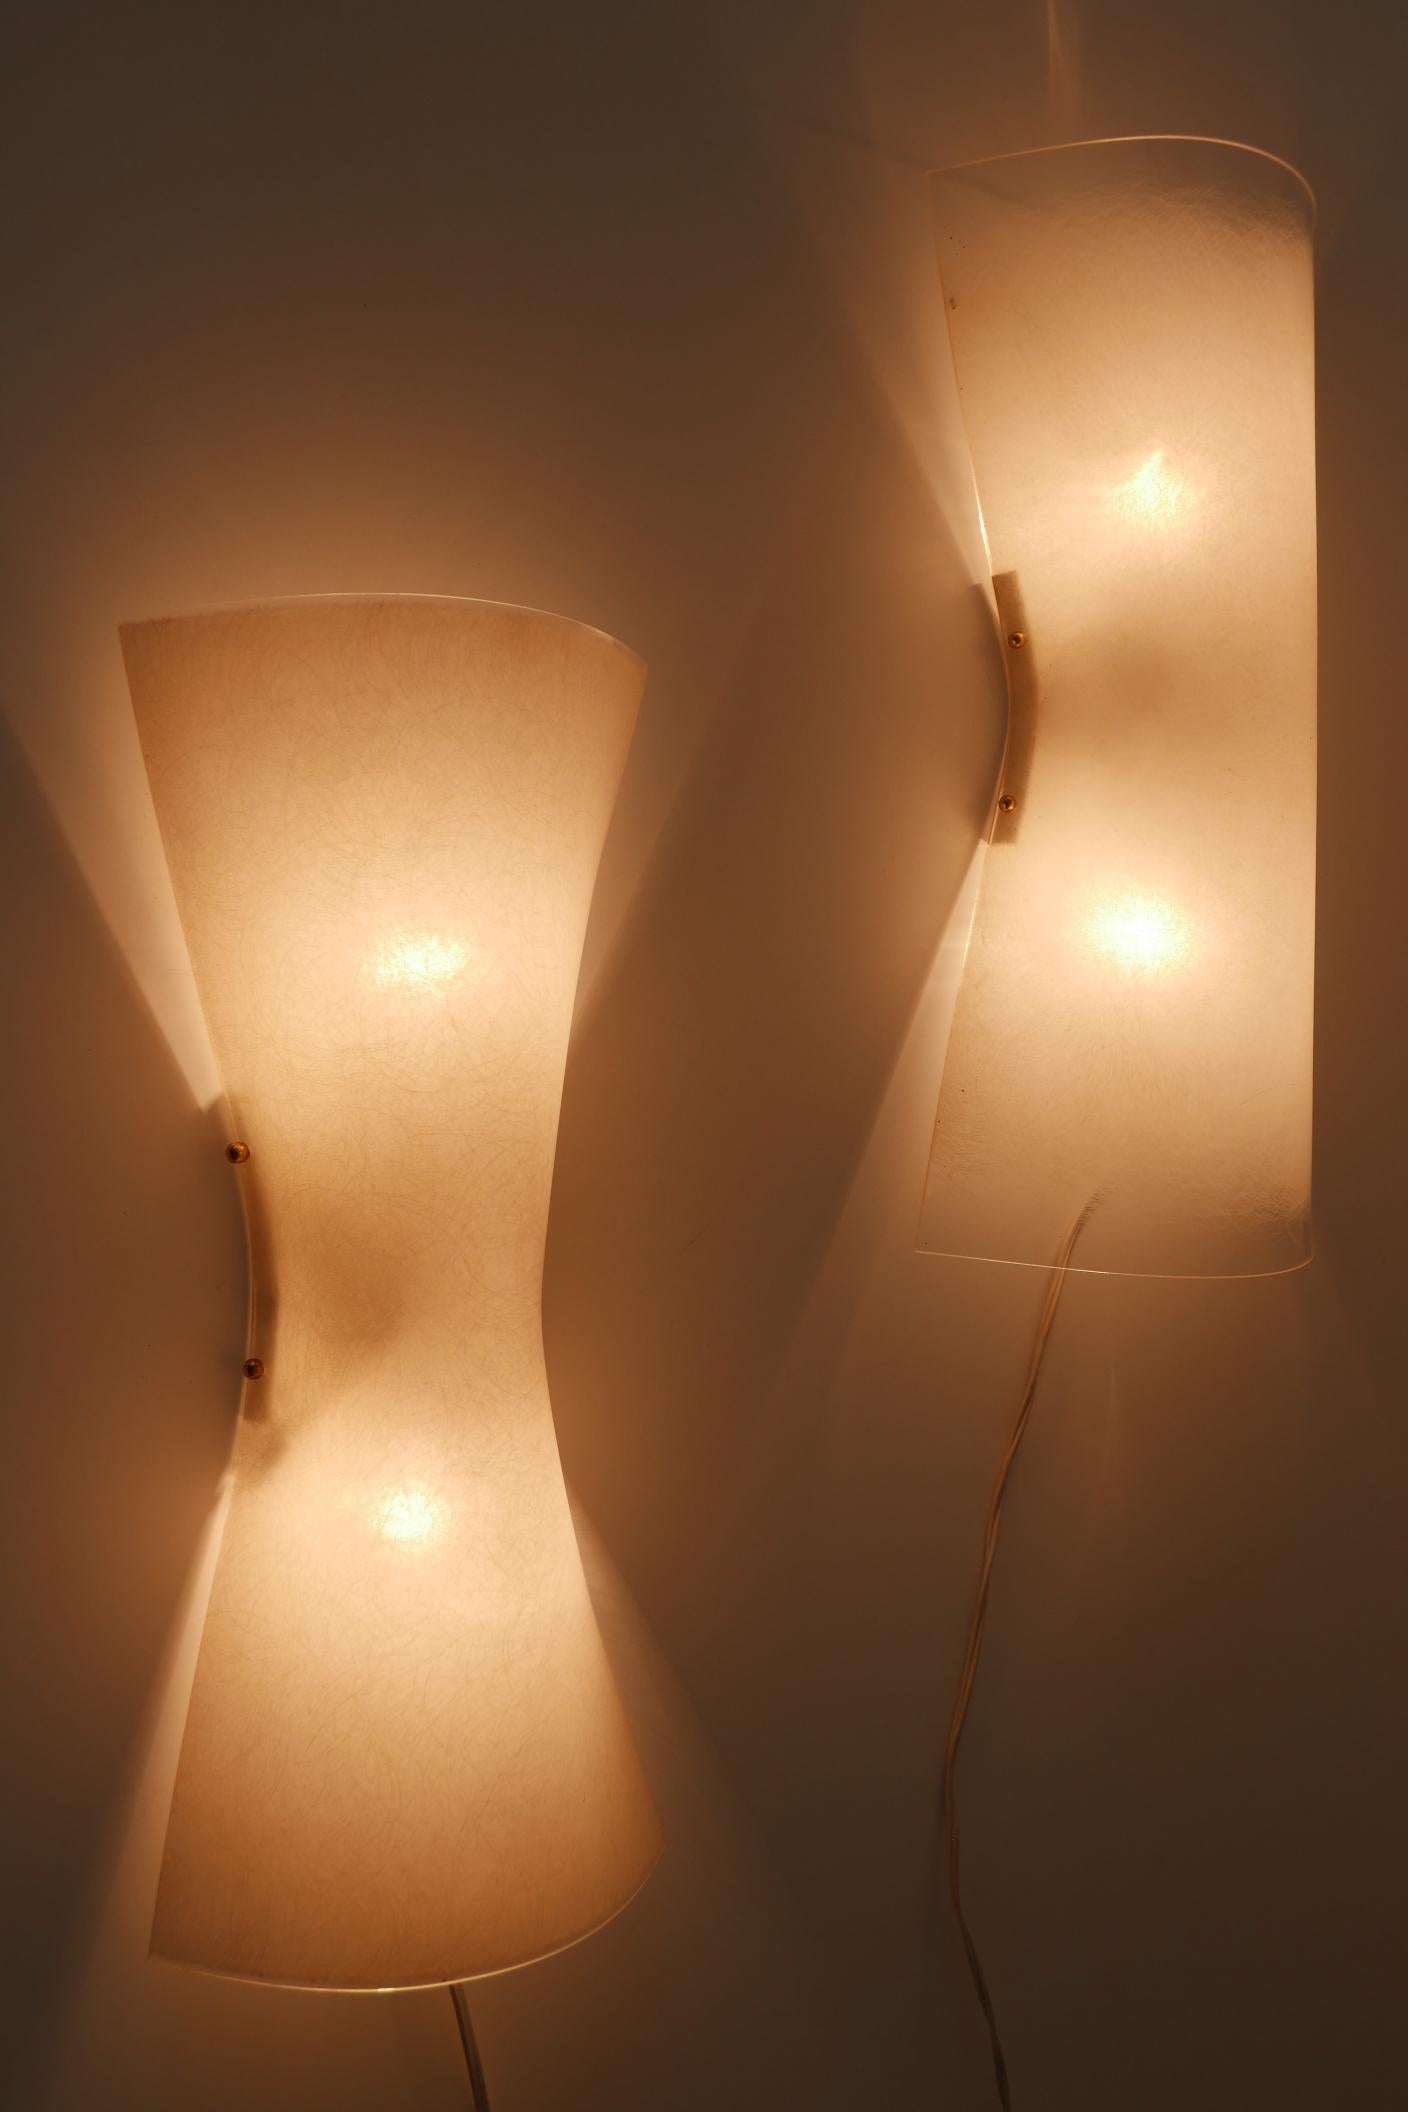 Set of Two Midcentury Wall Lamps or Sconces by Hanns Hoffmann-Lederer, 1960s For Sale 3